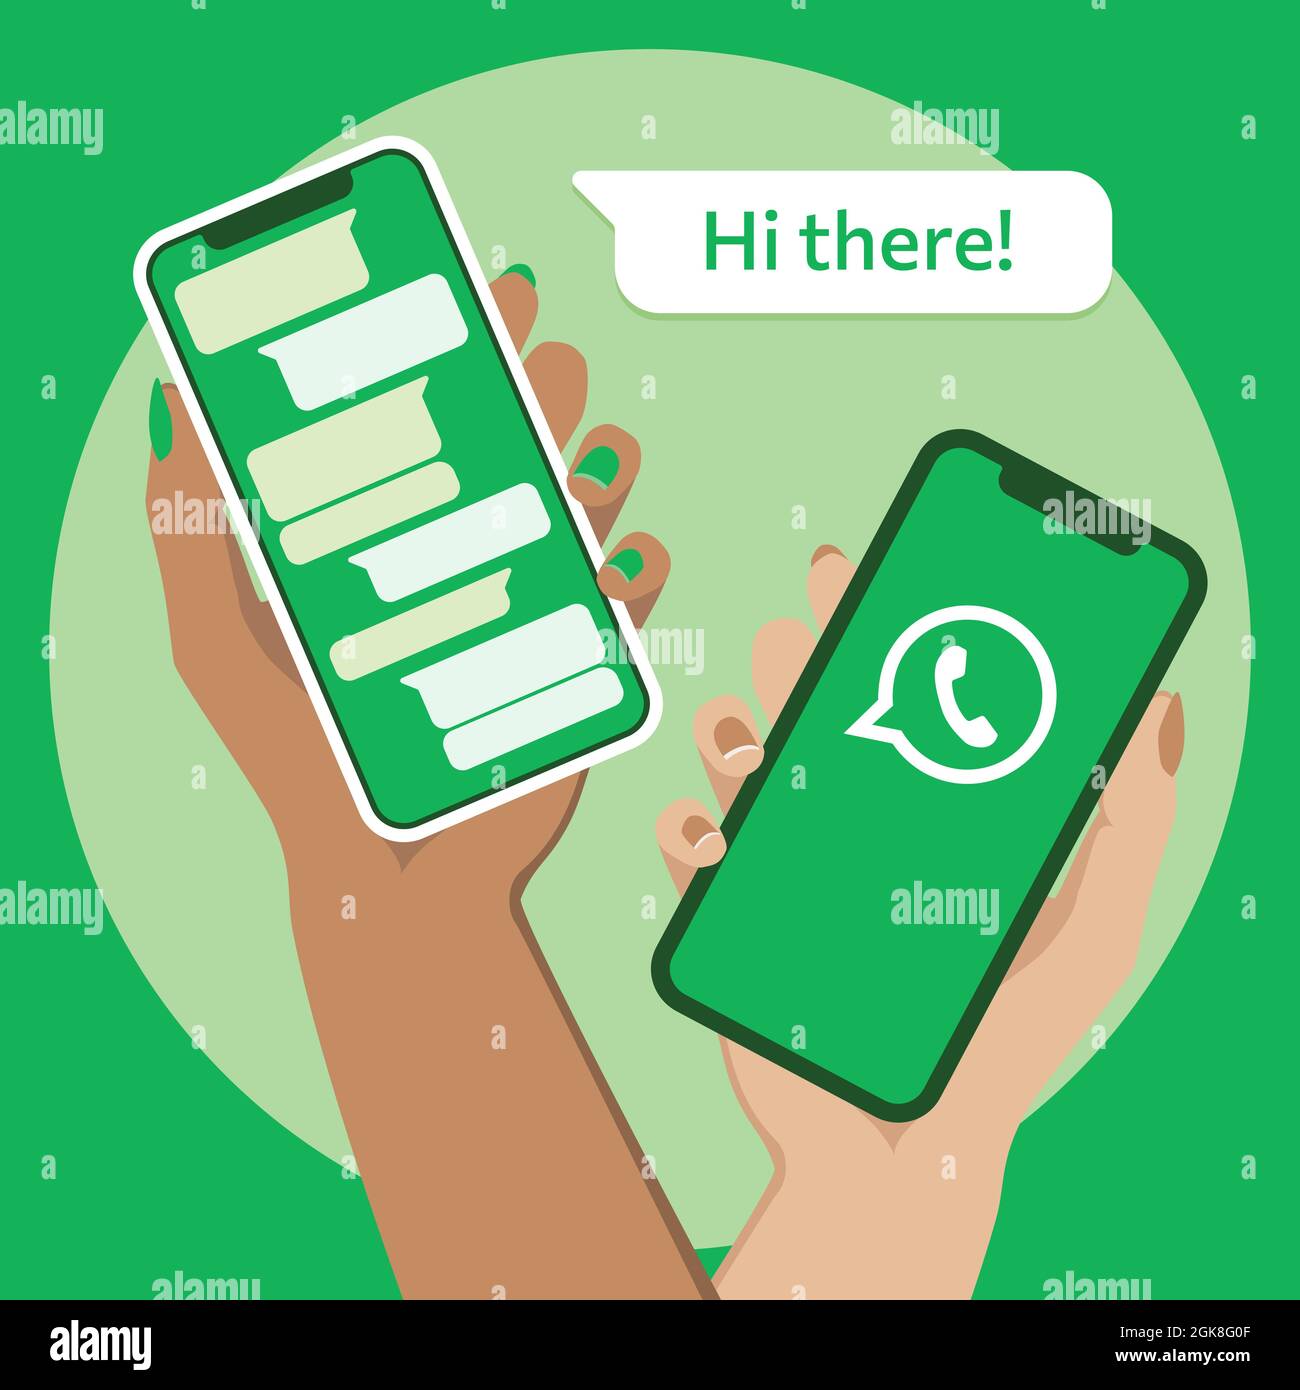 Two hands of woman holding smartphones with Whatsapp chat screen. Vector illustration. Flat colors. Green background. Stock Vector